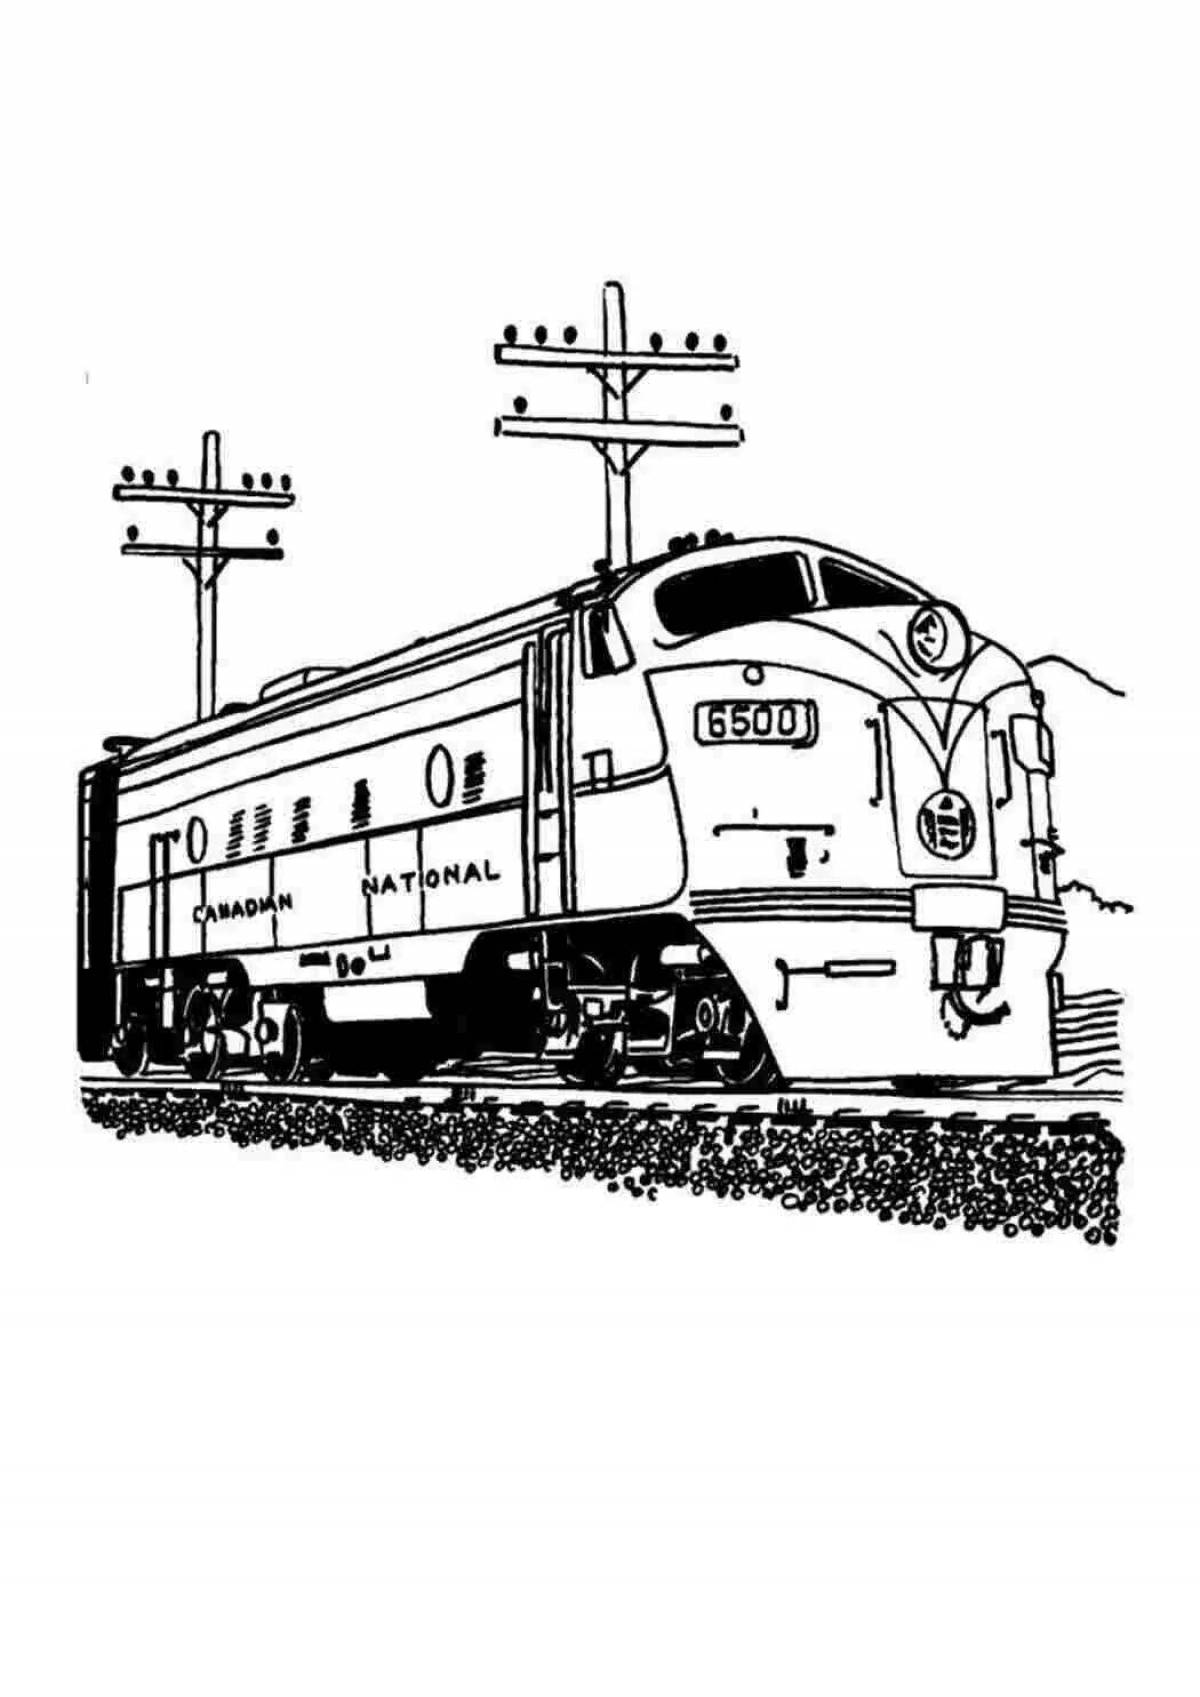 Adorable electric locomotive coloring book for kids